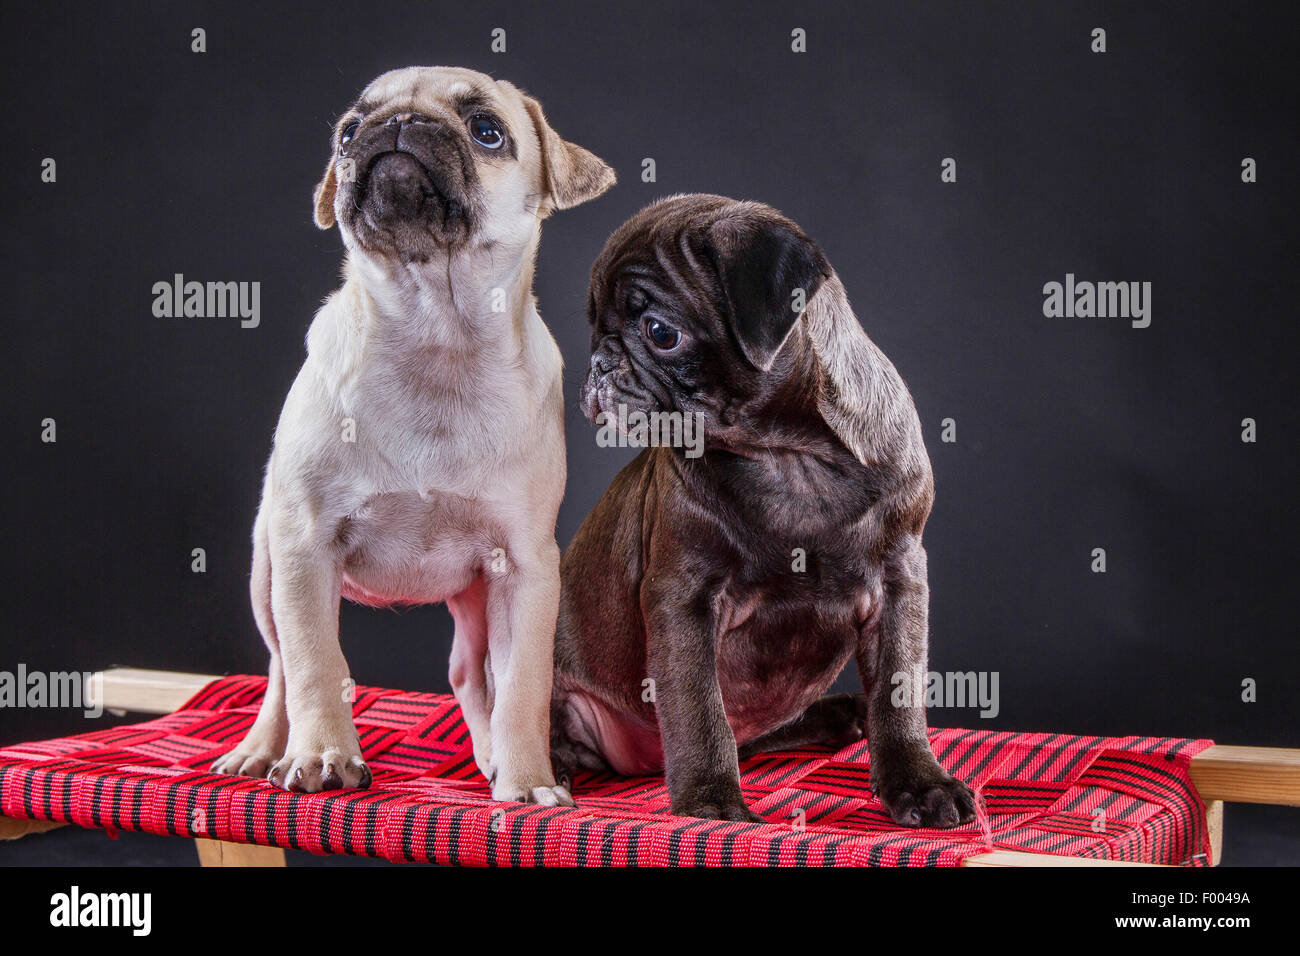 Pug (Canis lupus f. familiaris), two cute pug puppies together on a toboggan Stock Photo